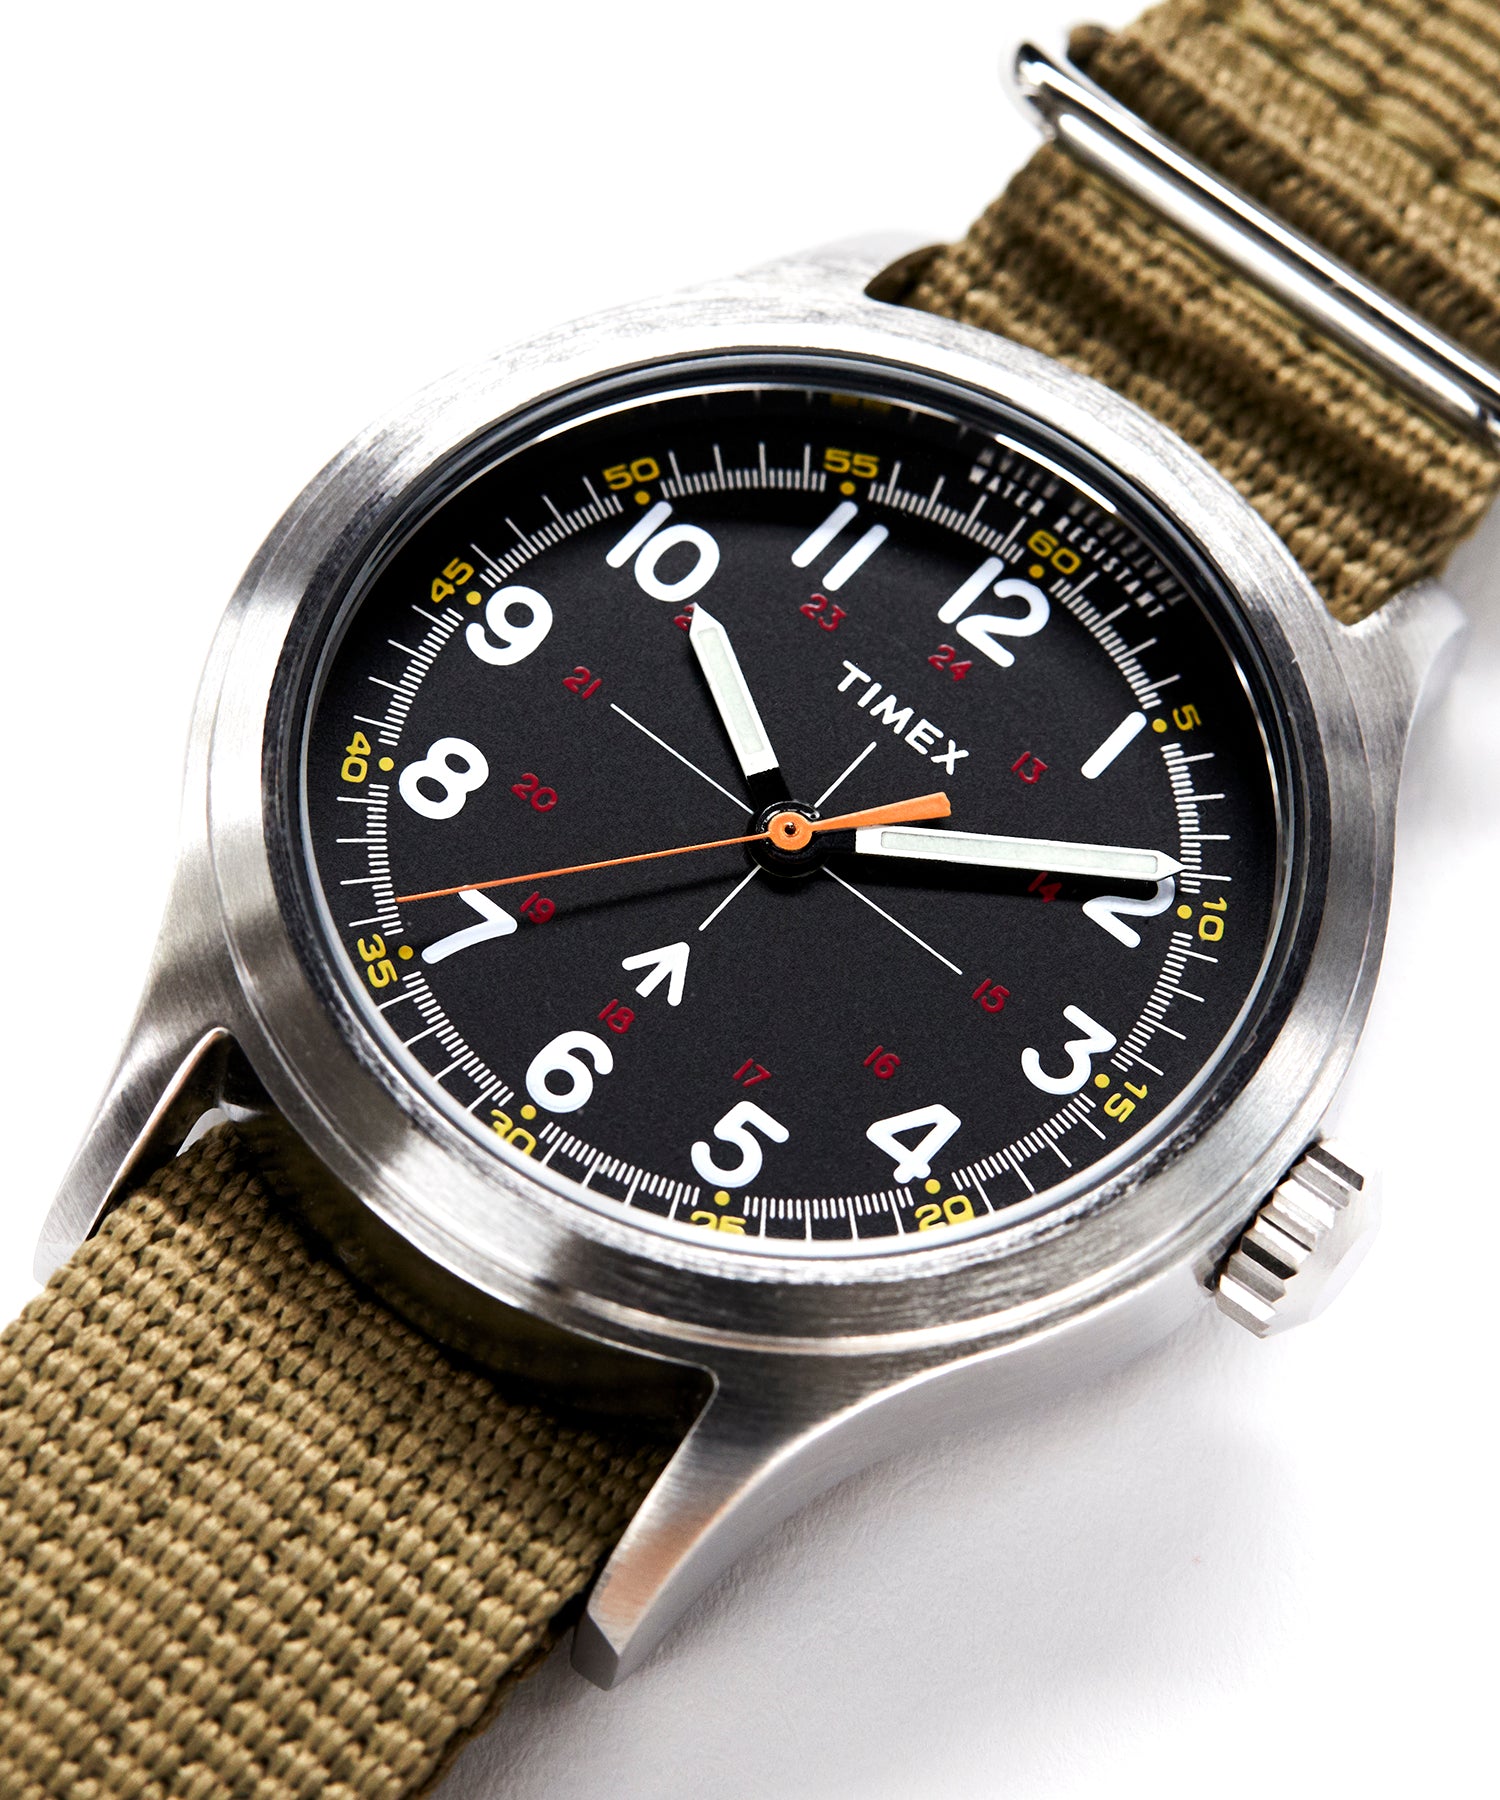 The Military Watch by Timex + Todd Snyder